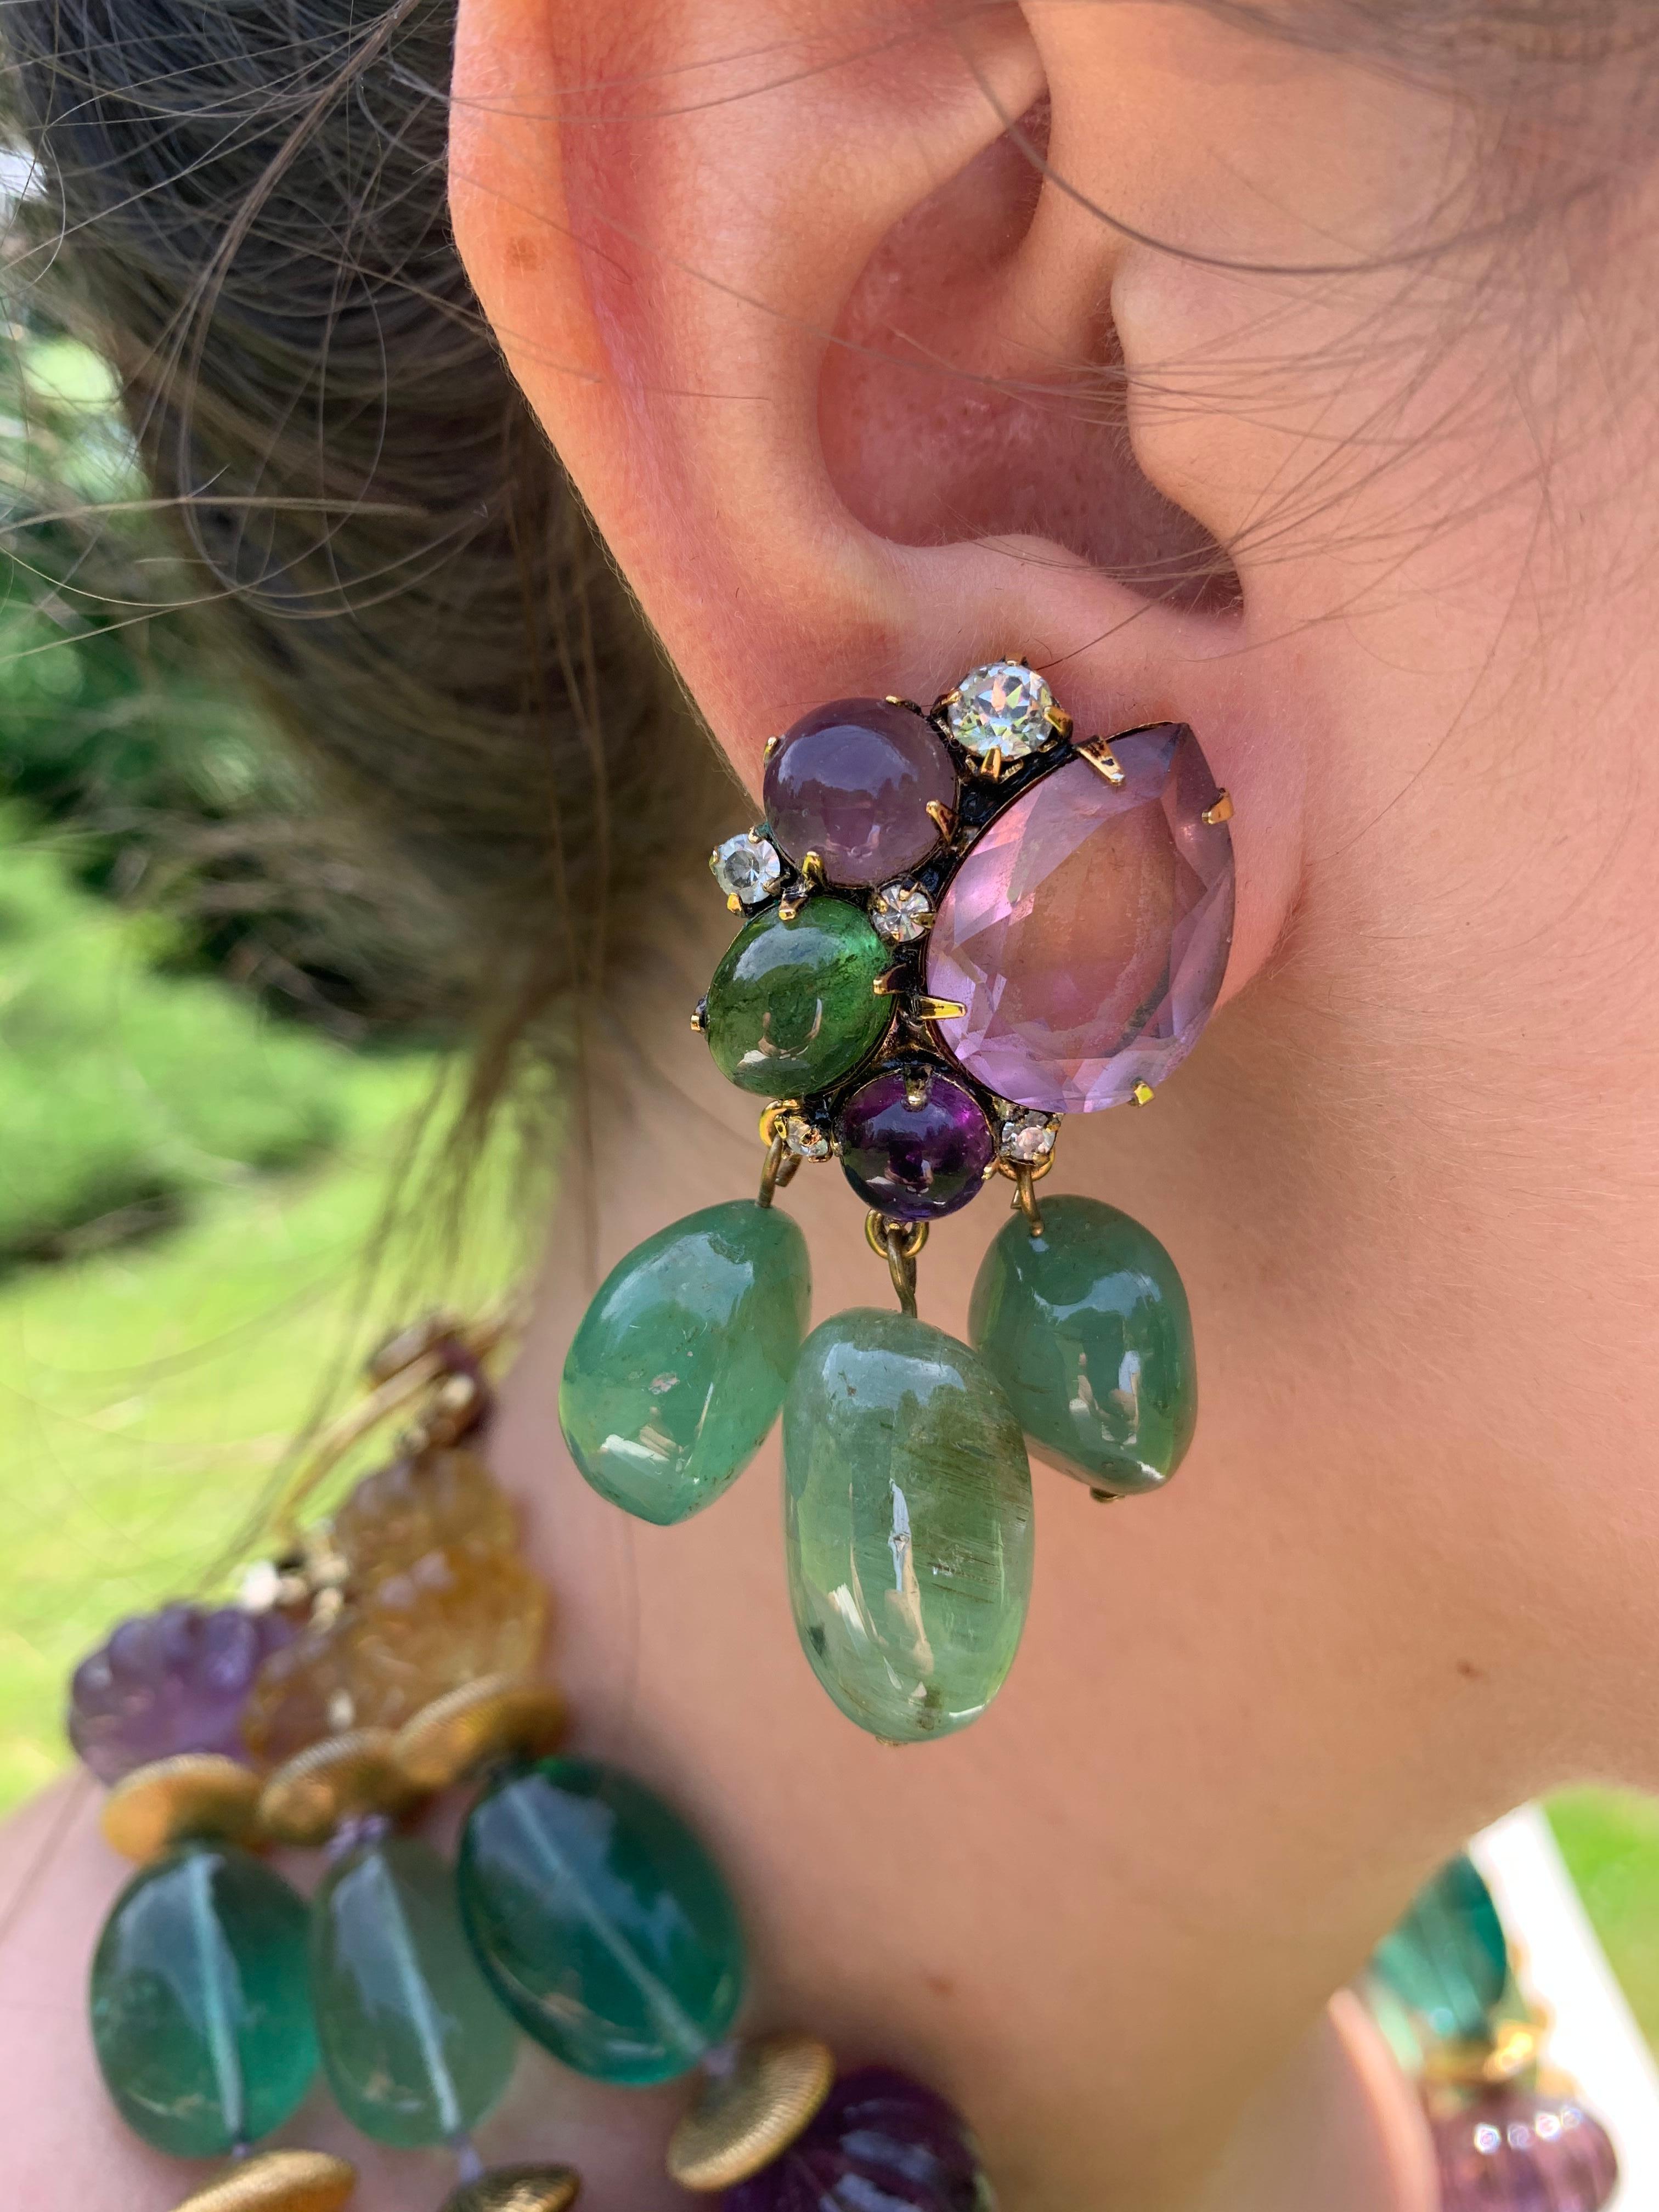 Vintage Iradj Moini faceted tear drop amethyst, cabochon amethyst, cabochon and tumbled fluorite earclips accented by crystal accents from the estate of a Vanderbilt heiress.
Iradj Moini is a New York City based jeweler whose jewels have been